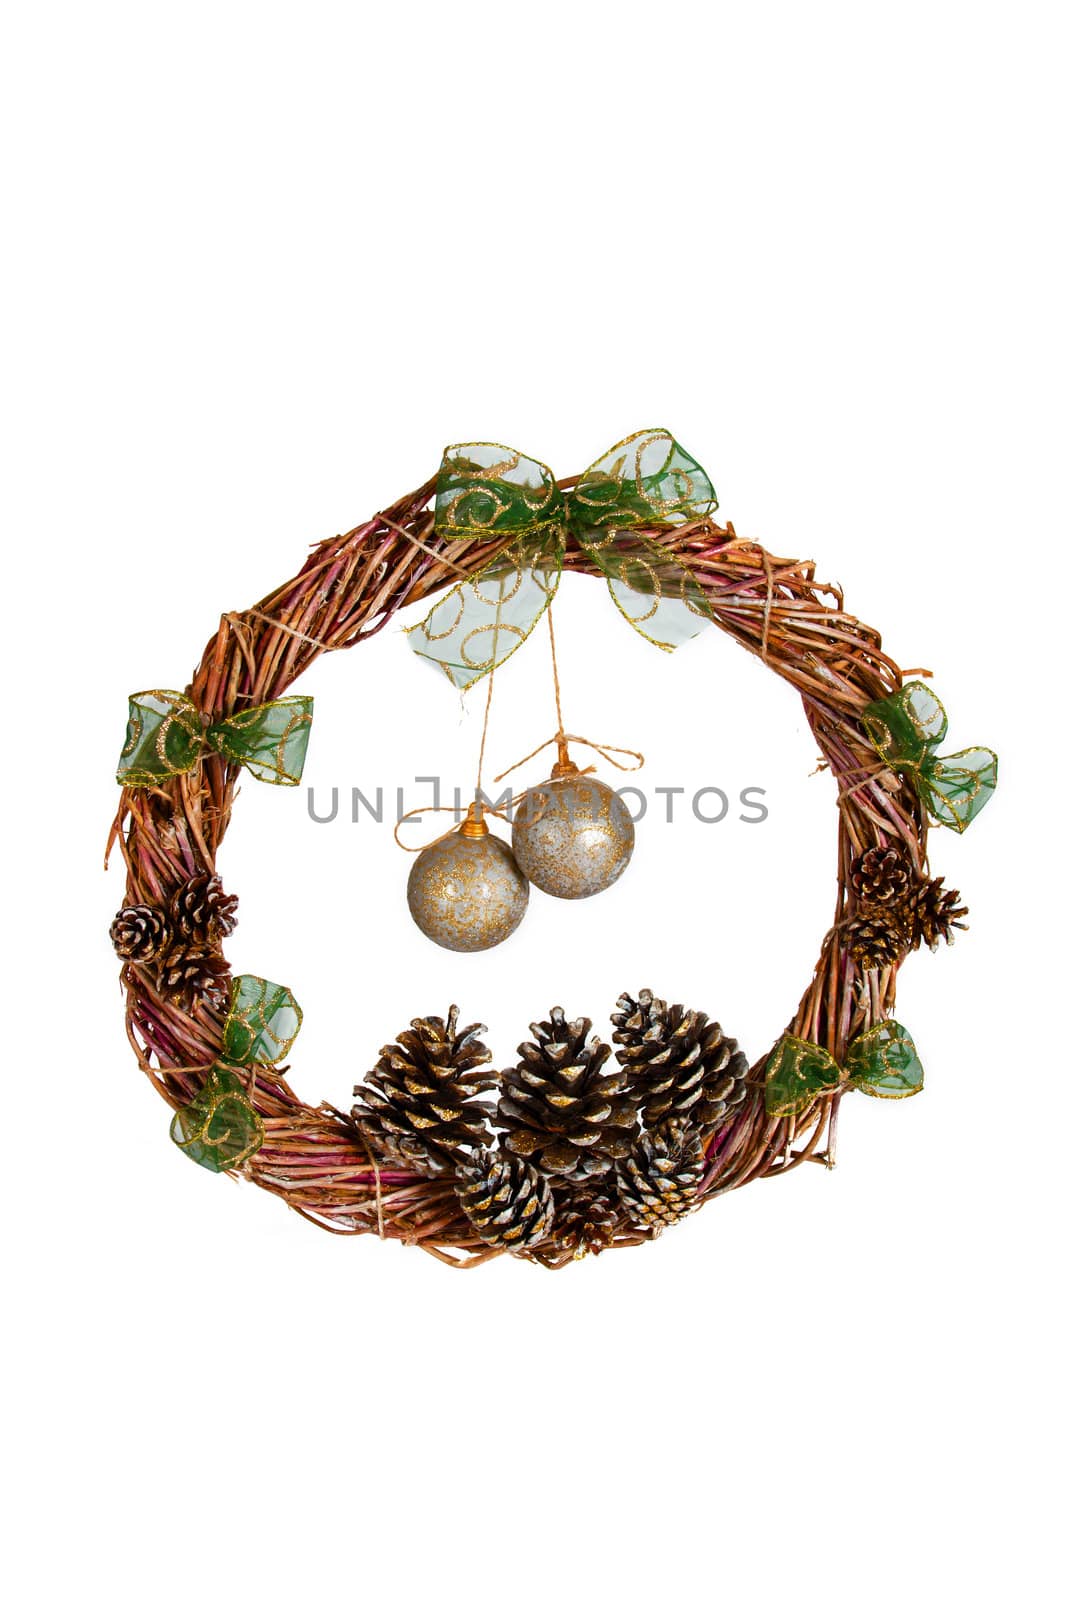 The image of a Christmas wreath isolated, on a white background